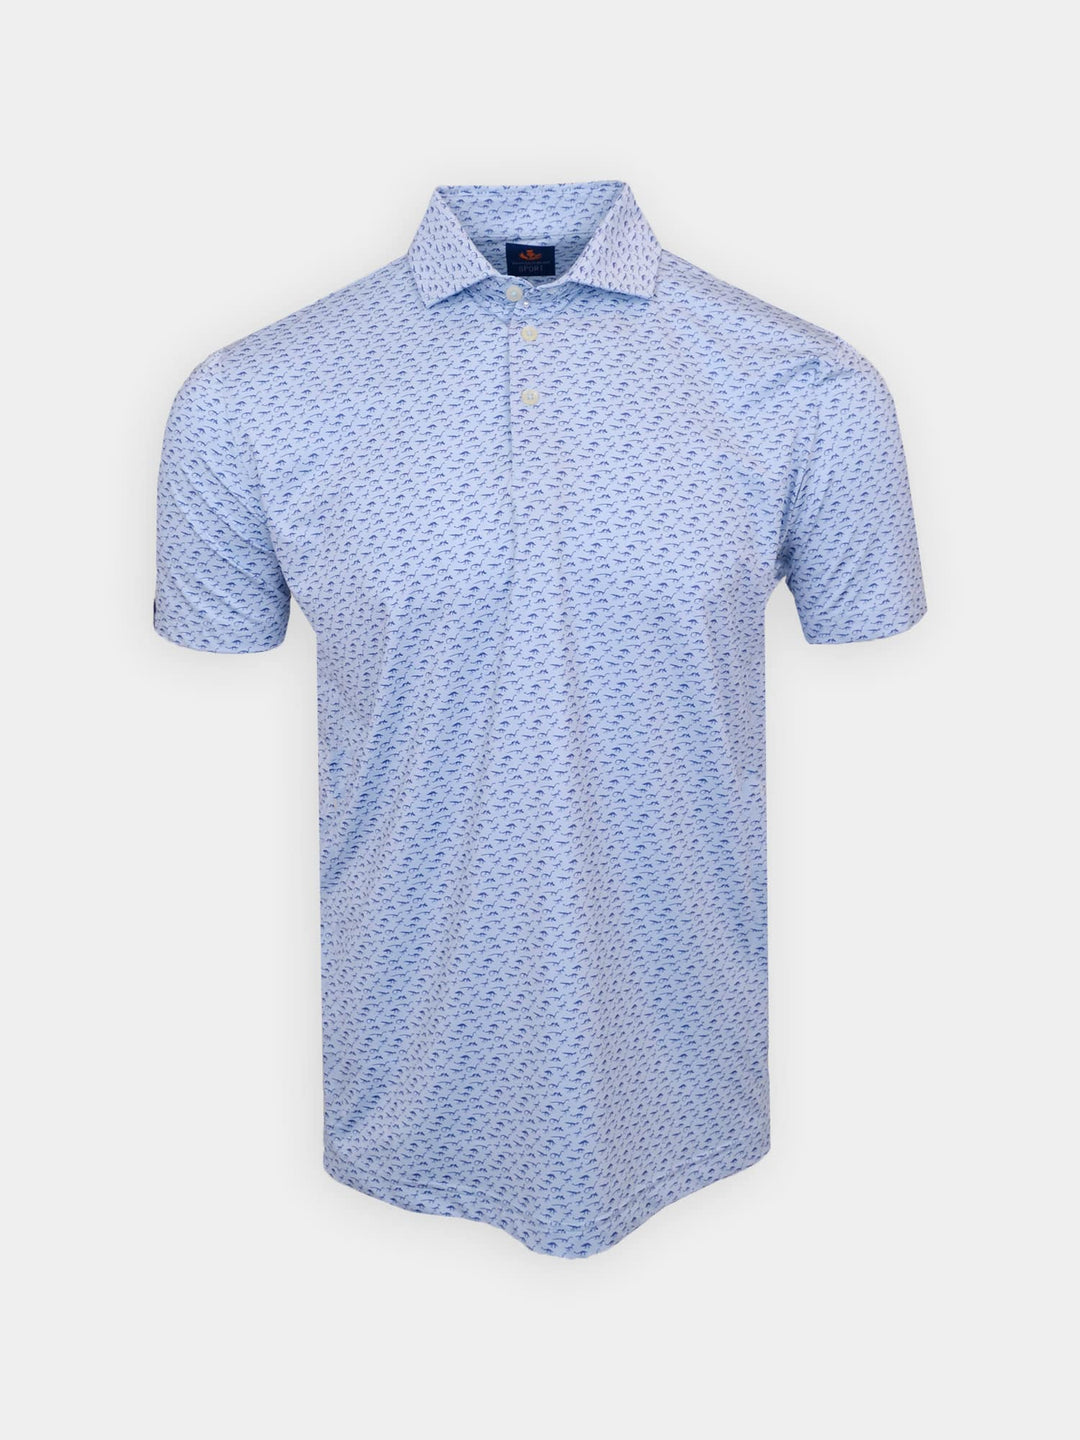 Donald Ross Mens Sport Fit Angus Polo - SKY BLUE/NAVY